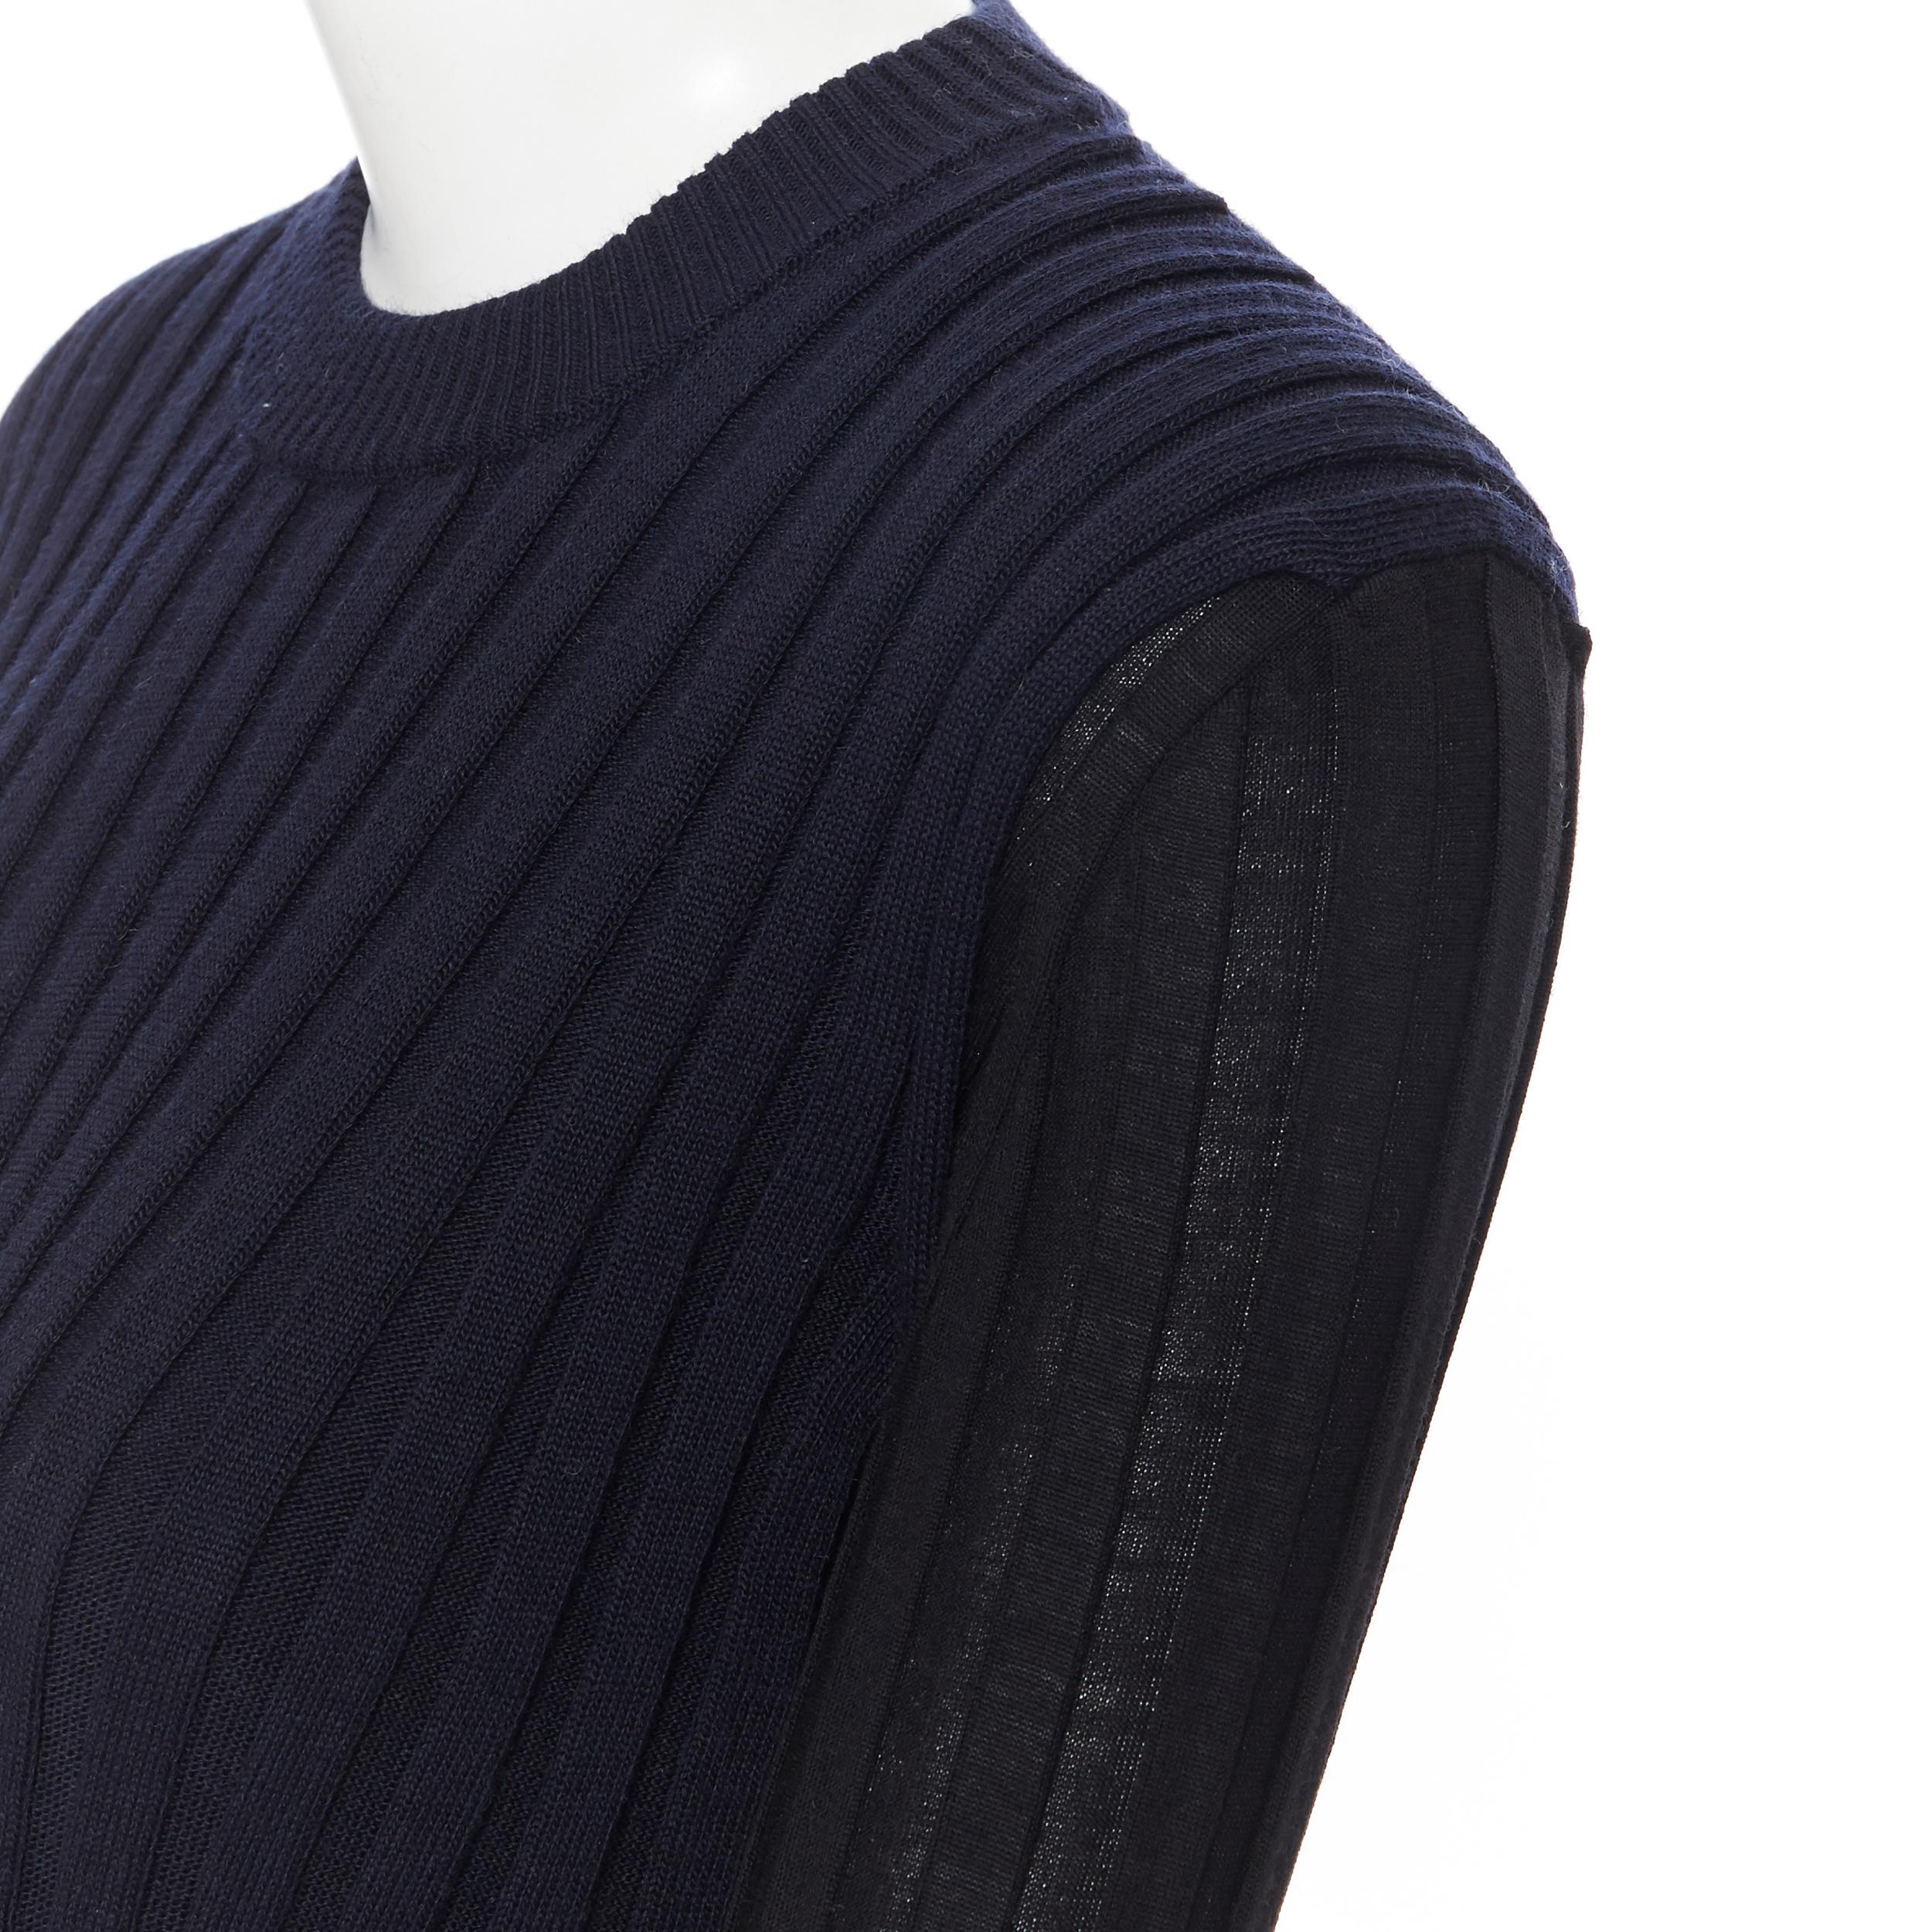 runway OLD CELINE PHOEBE PHILO black ribbed knit dual pocket flared cuff top XS 4